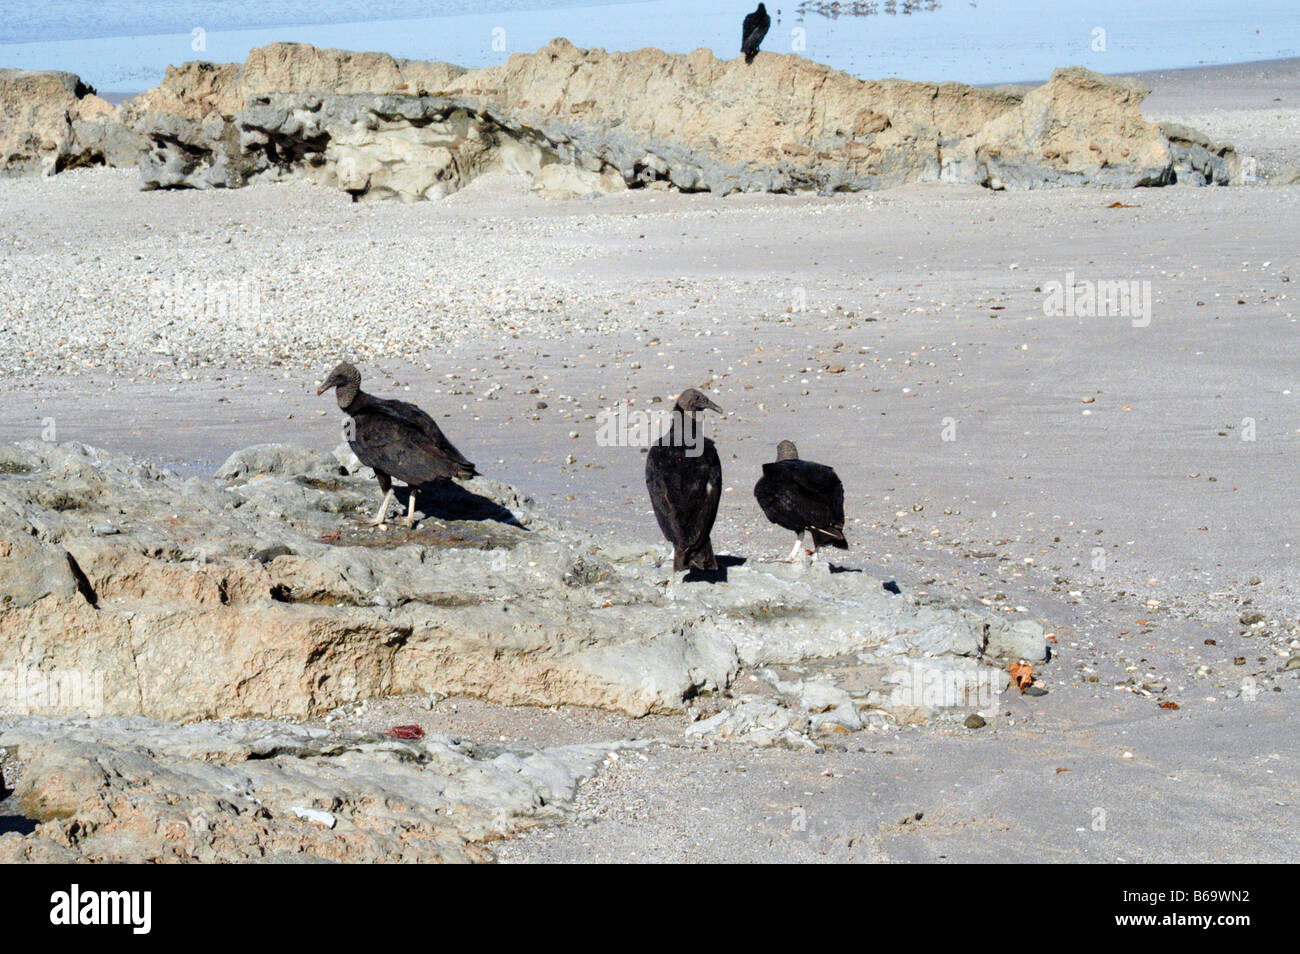 Vultures on beach, Costa Rica Stock Photo